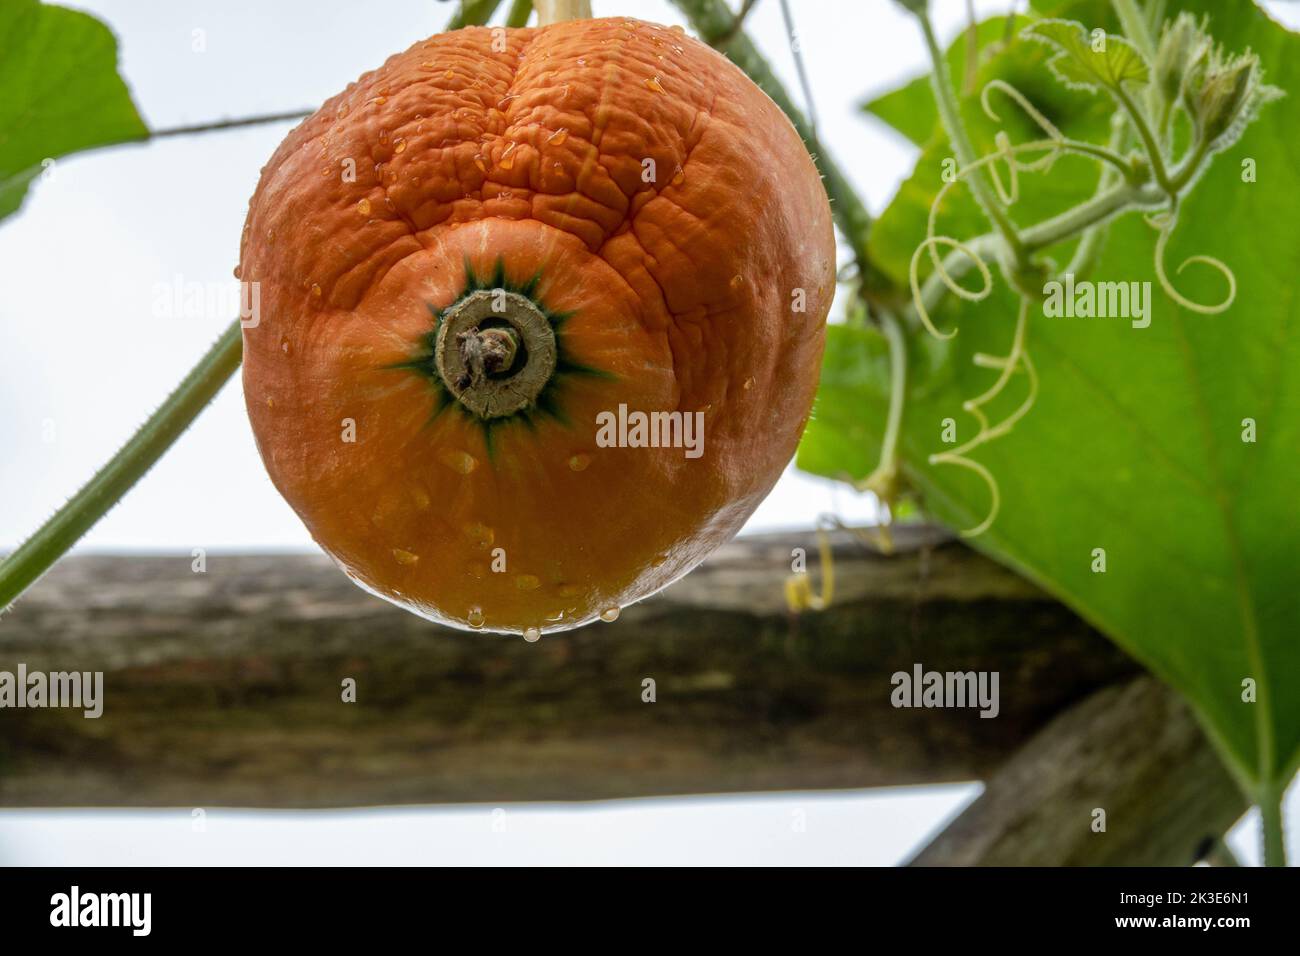 close up of raindrops on a bright orange pumpkin growing ready for Halloween Stock Photo